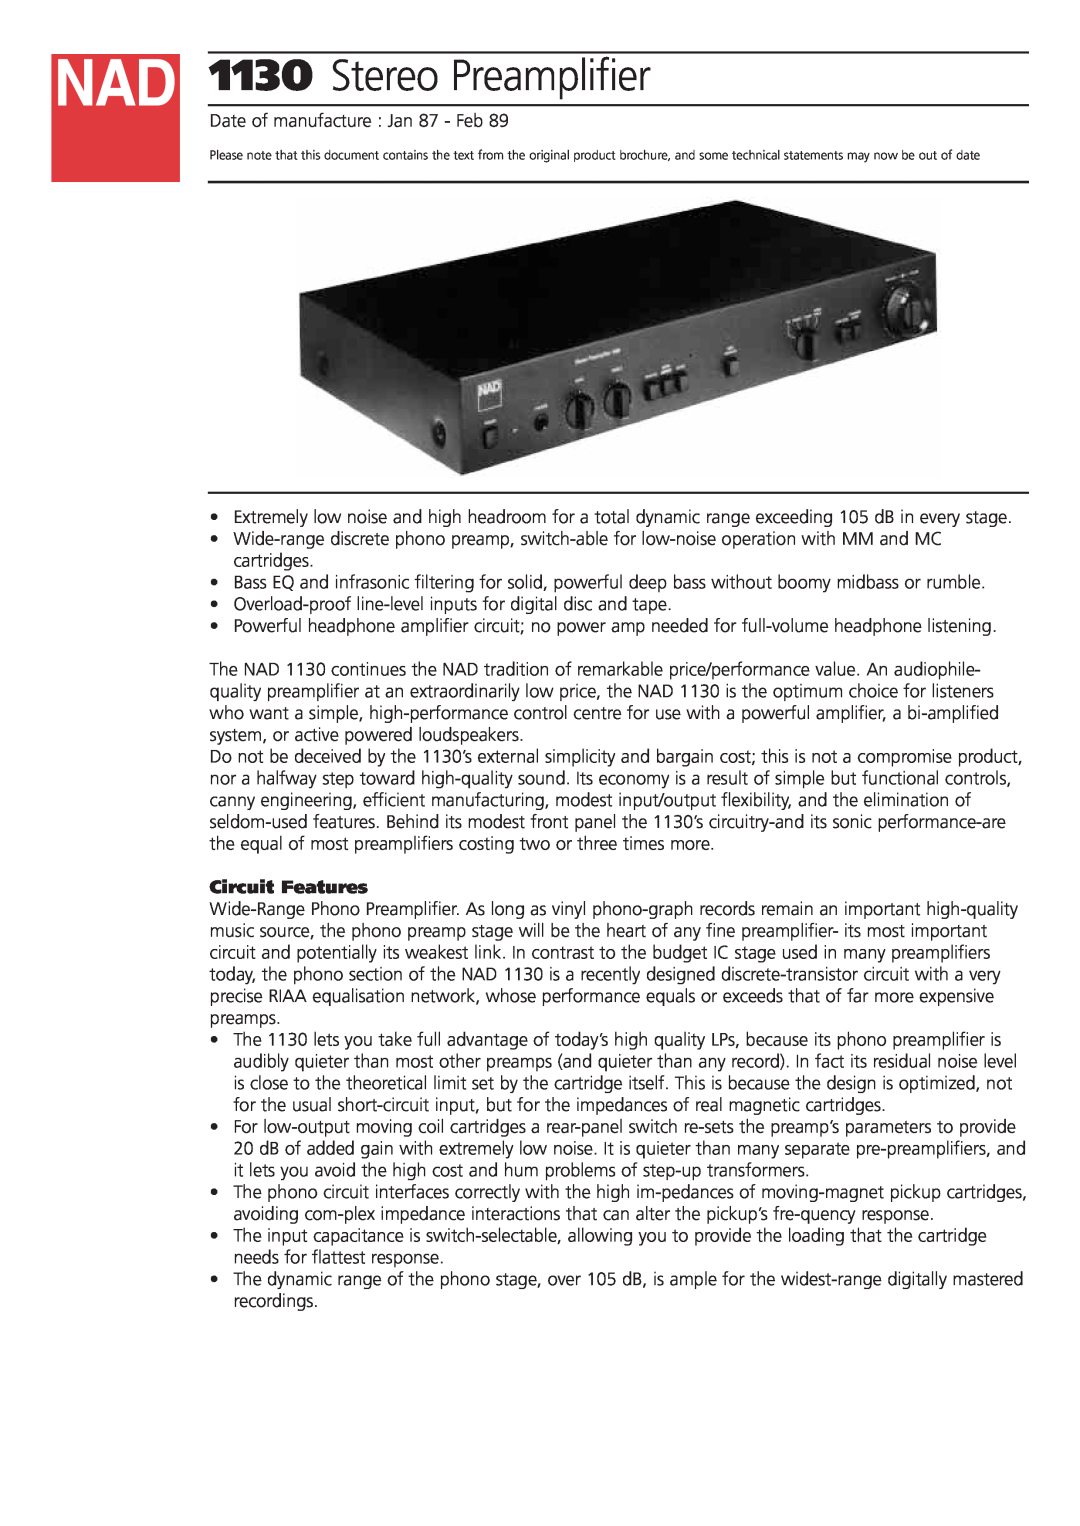 NAD 1130 brochure Circuit Features, Stereo Preamplifier 